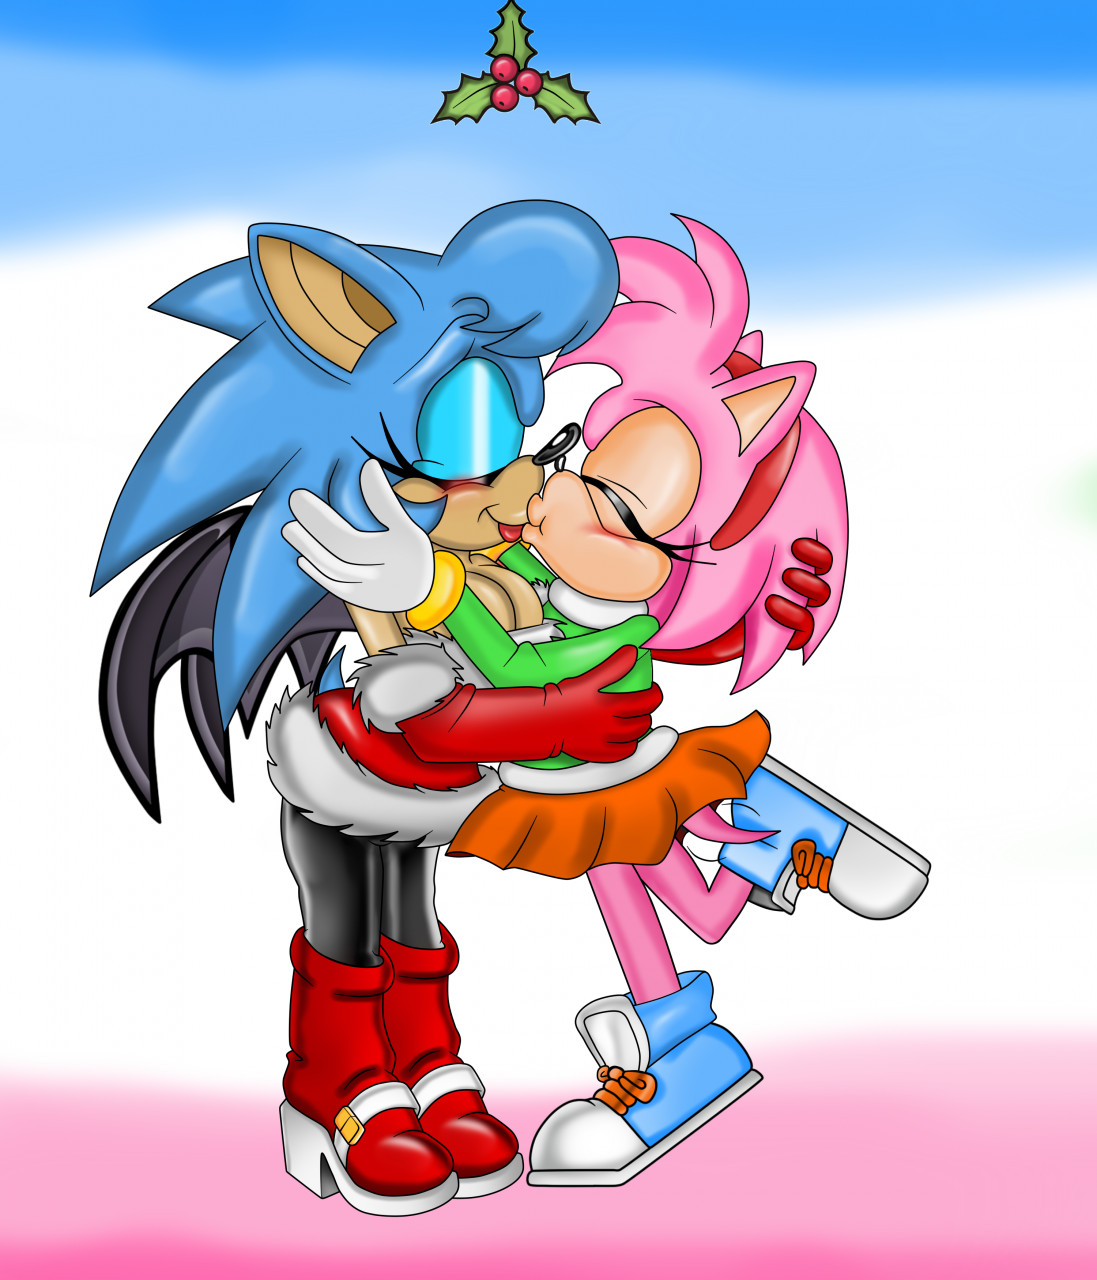 Amy and rouge kiss